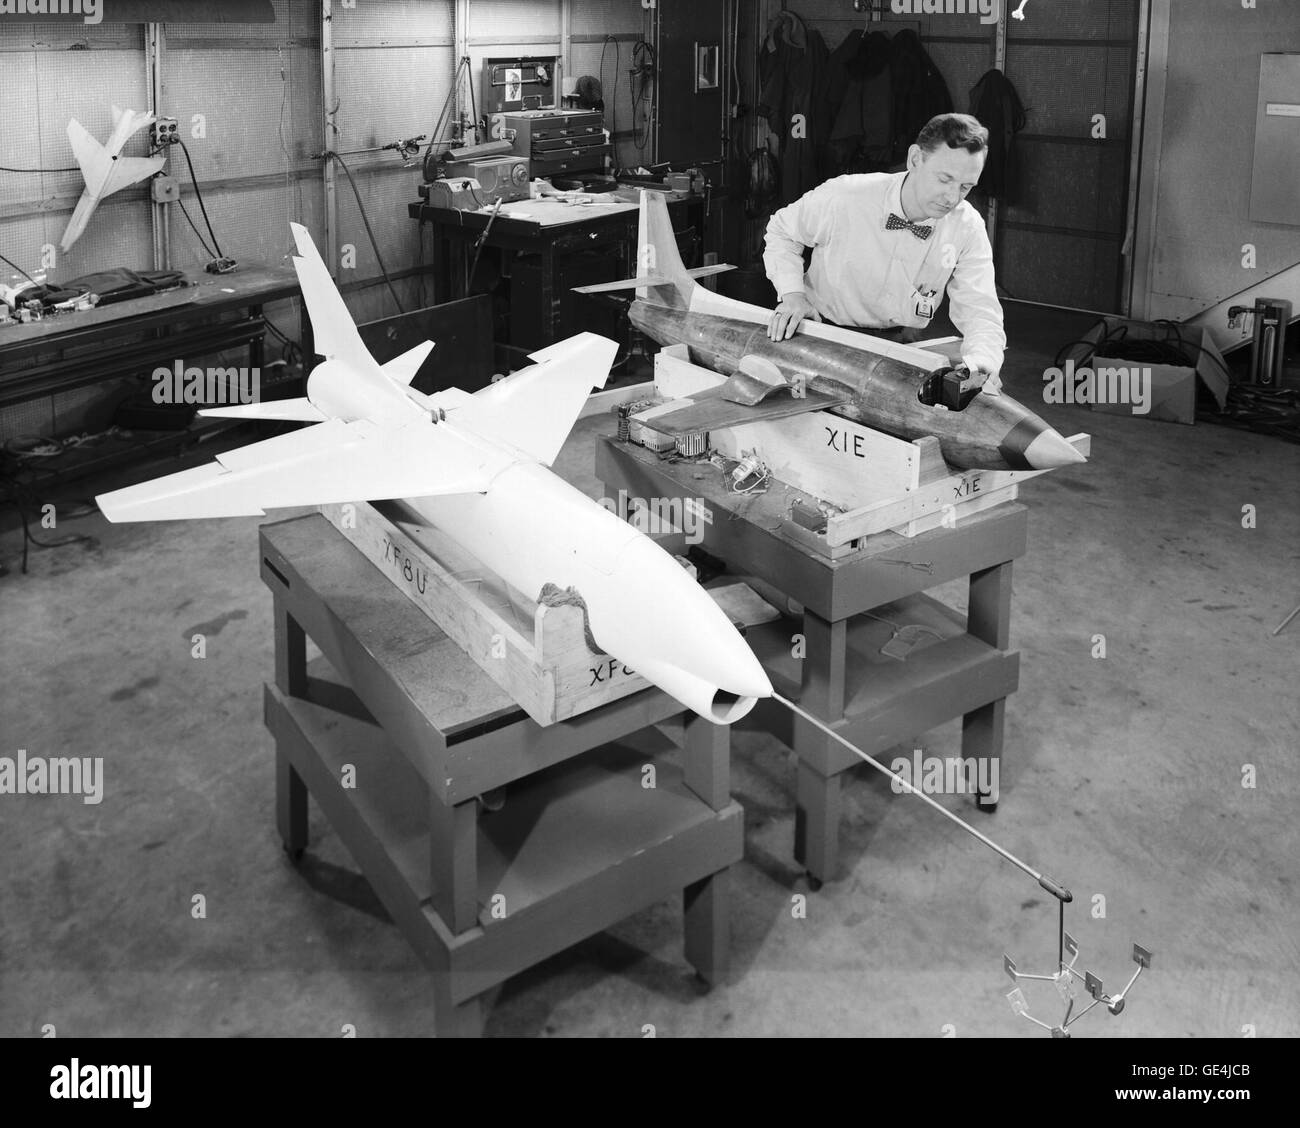 A technician prepares dynamic models of the Bell X-1E and the Vought XF-8U Crusader for wind tunnel testing in 1957. The Crusader was then the Navy's fastest aircraft (maximum speed Mach 1.75 at 35,000 feet).   February 19, 1957 Stock Photo